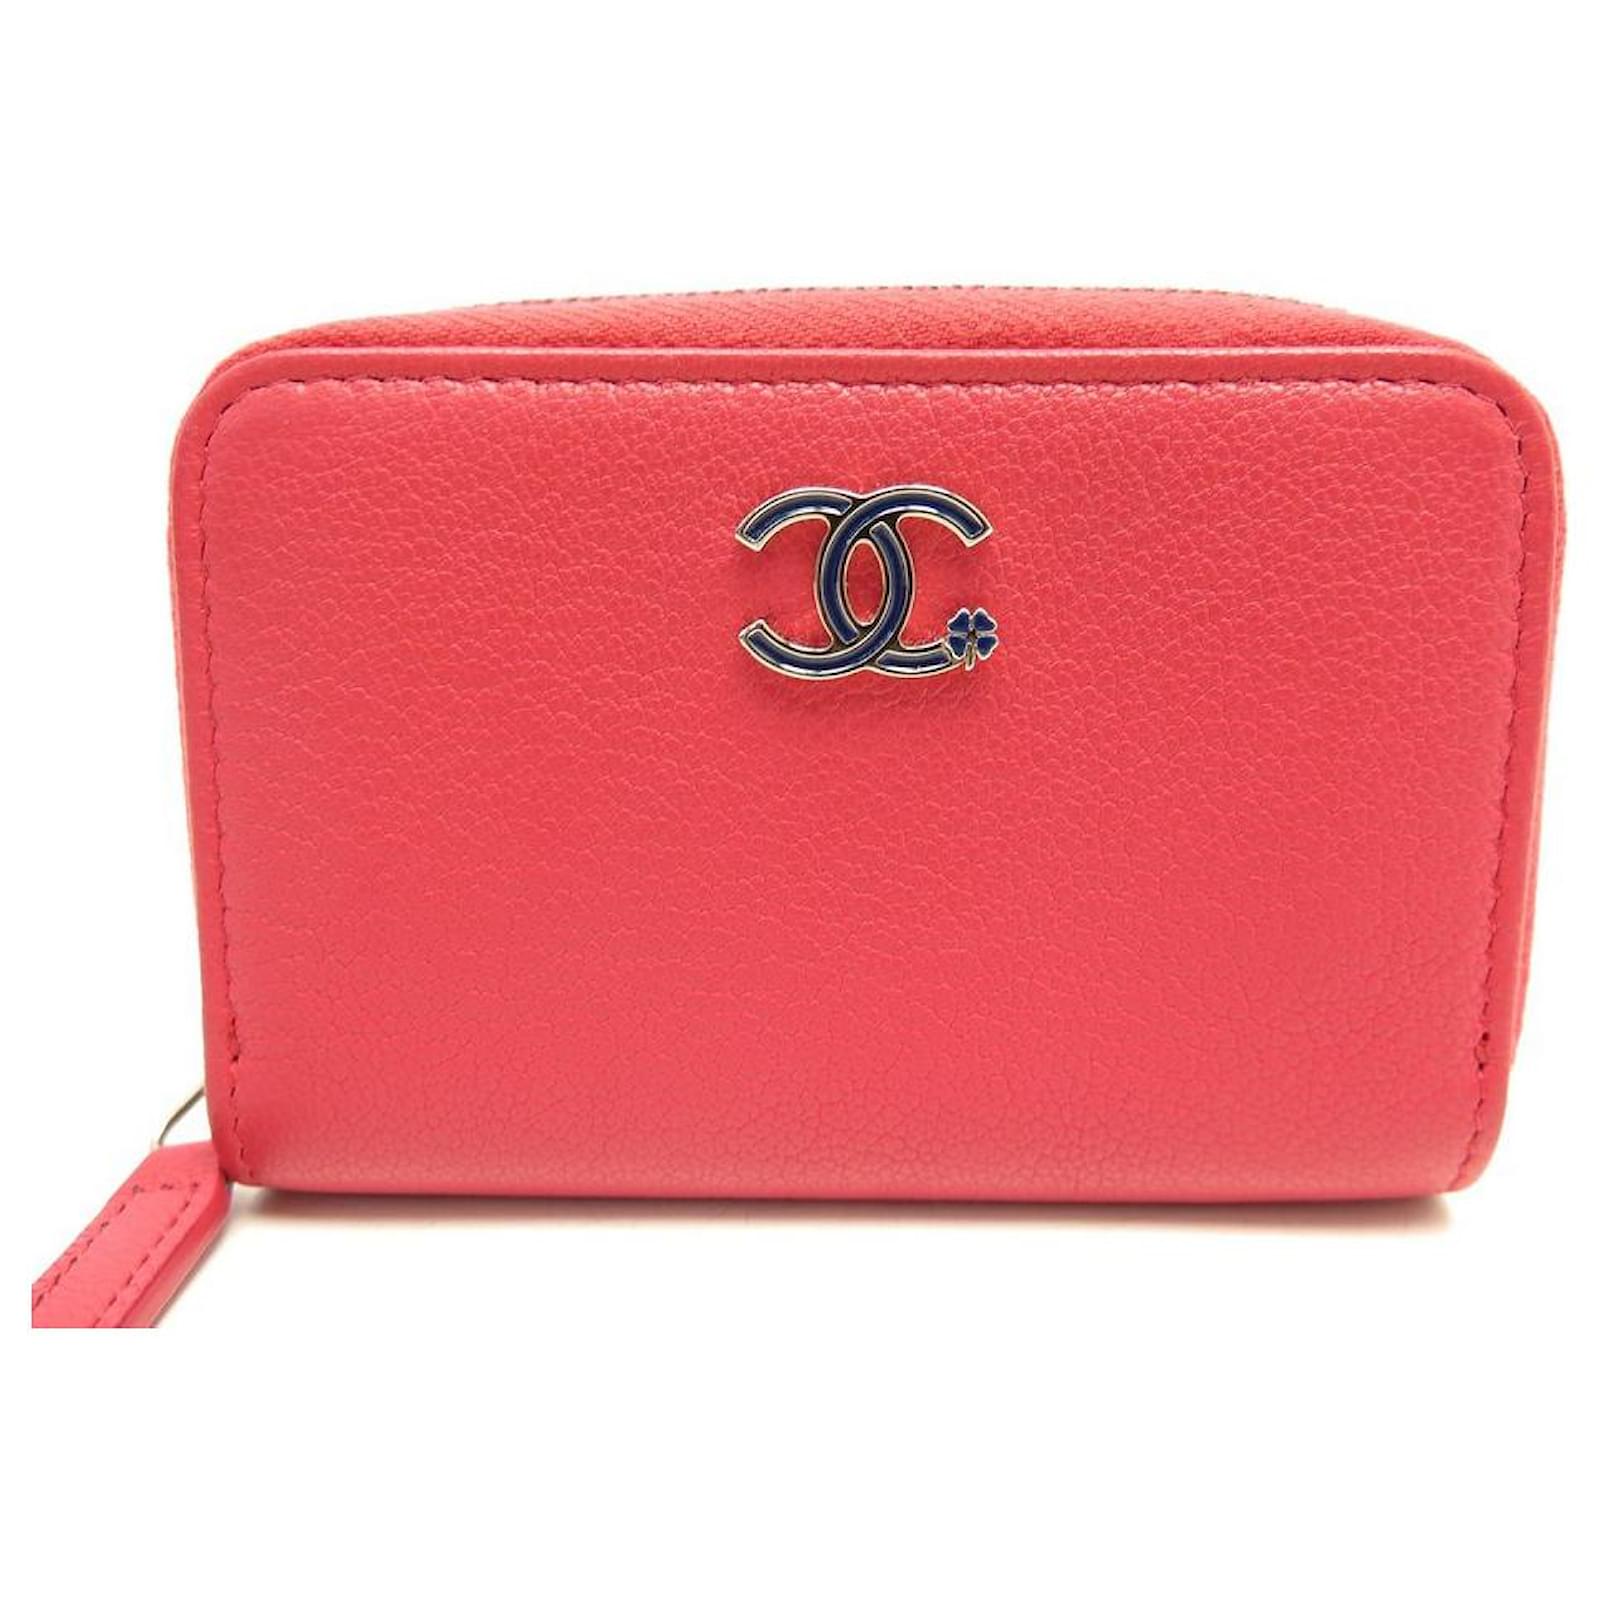 NEW CHANEL CARD HOLDER IN PINK LEATHER NEW PINK LEATHER CARDS HOLDER WALLET  ref.440850 - Joli Closet